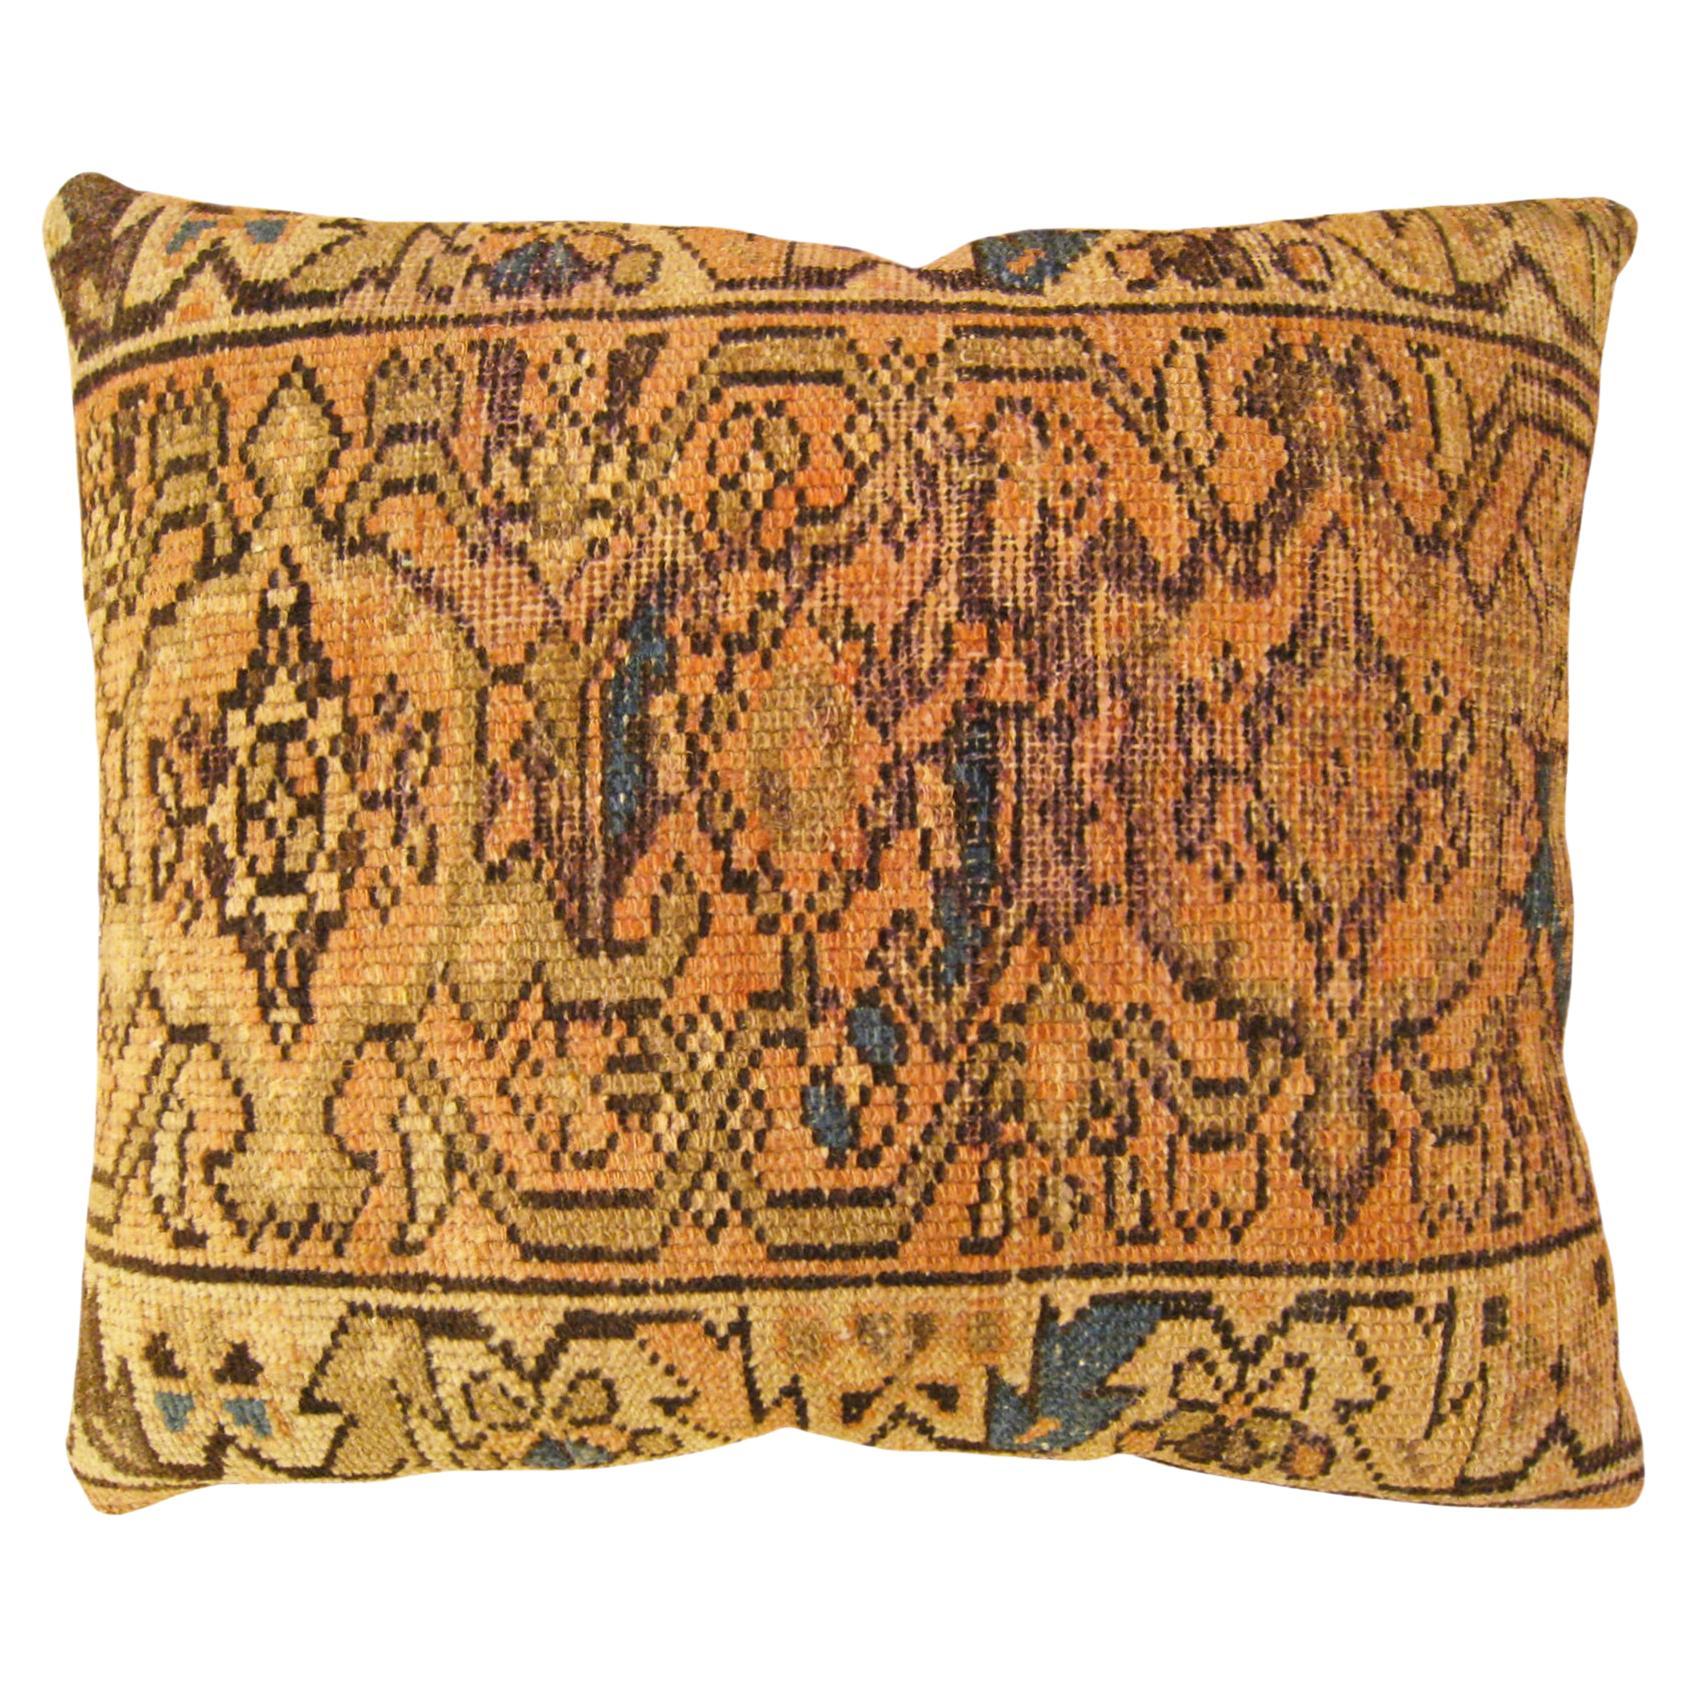  Decorative Antique Persian Hamadan Rug Pillow with Geometric Abstracts Allover